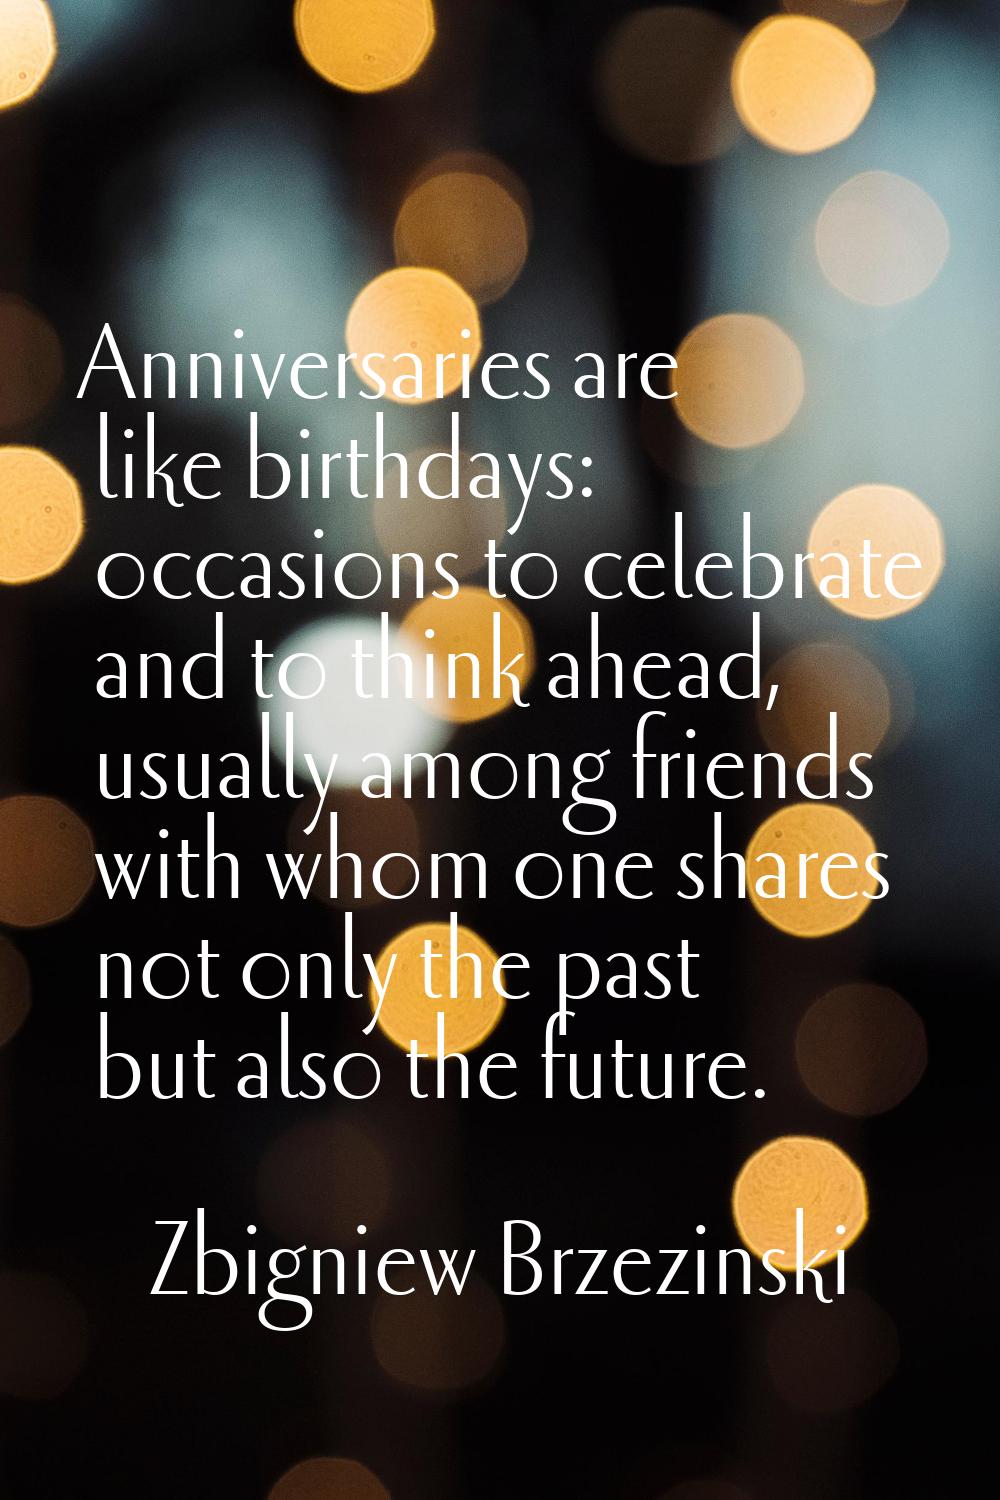 Anniversaries are like birthdays: occasions to celebrate and to think ahead, usually among friends 